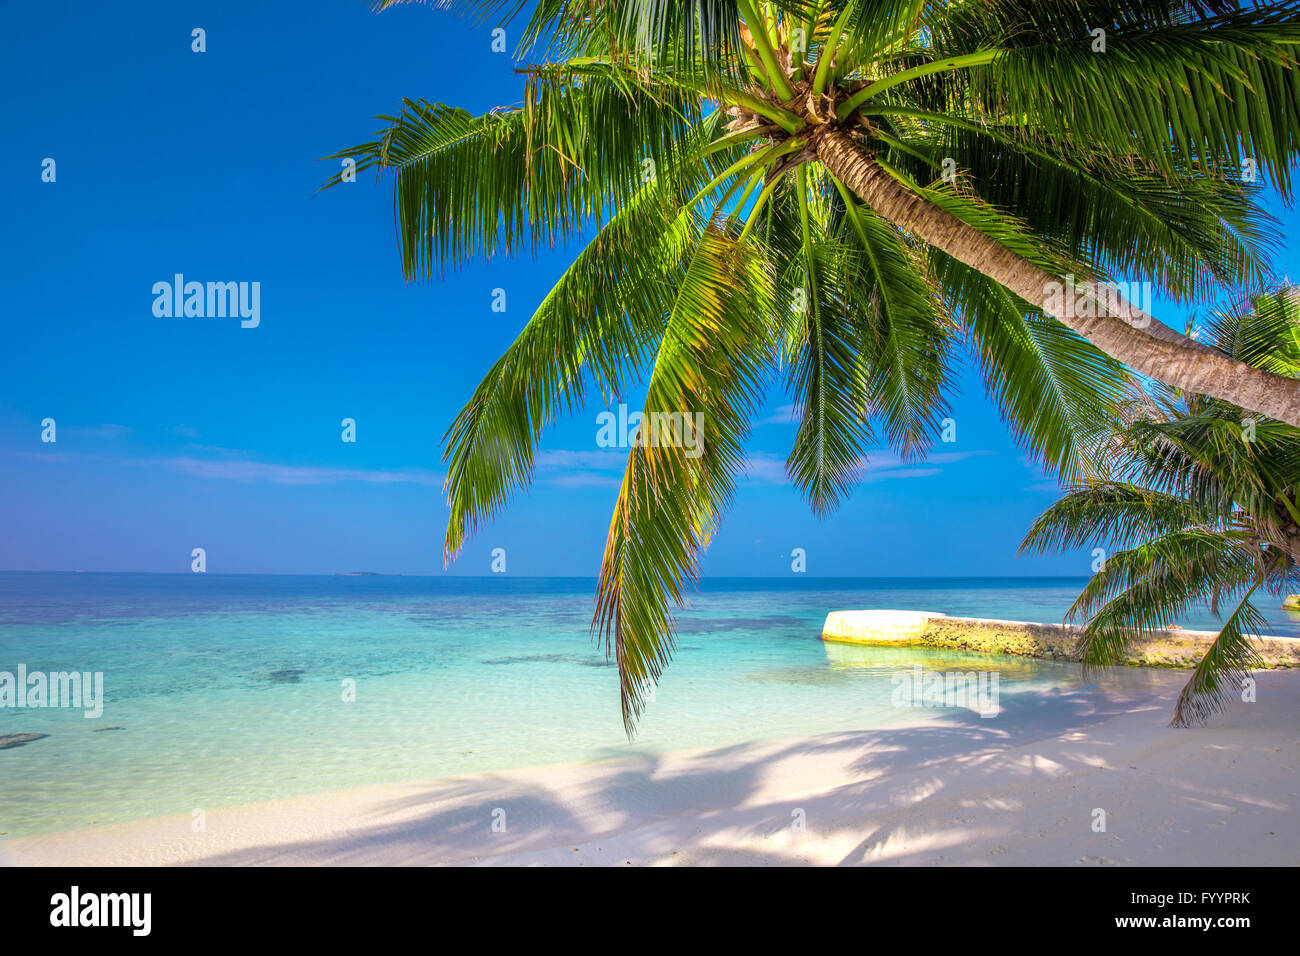 Tropical island with sandy beach, palm trees, overwater bungalows and tourquise clear water Stock Photo